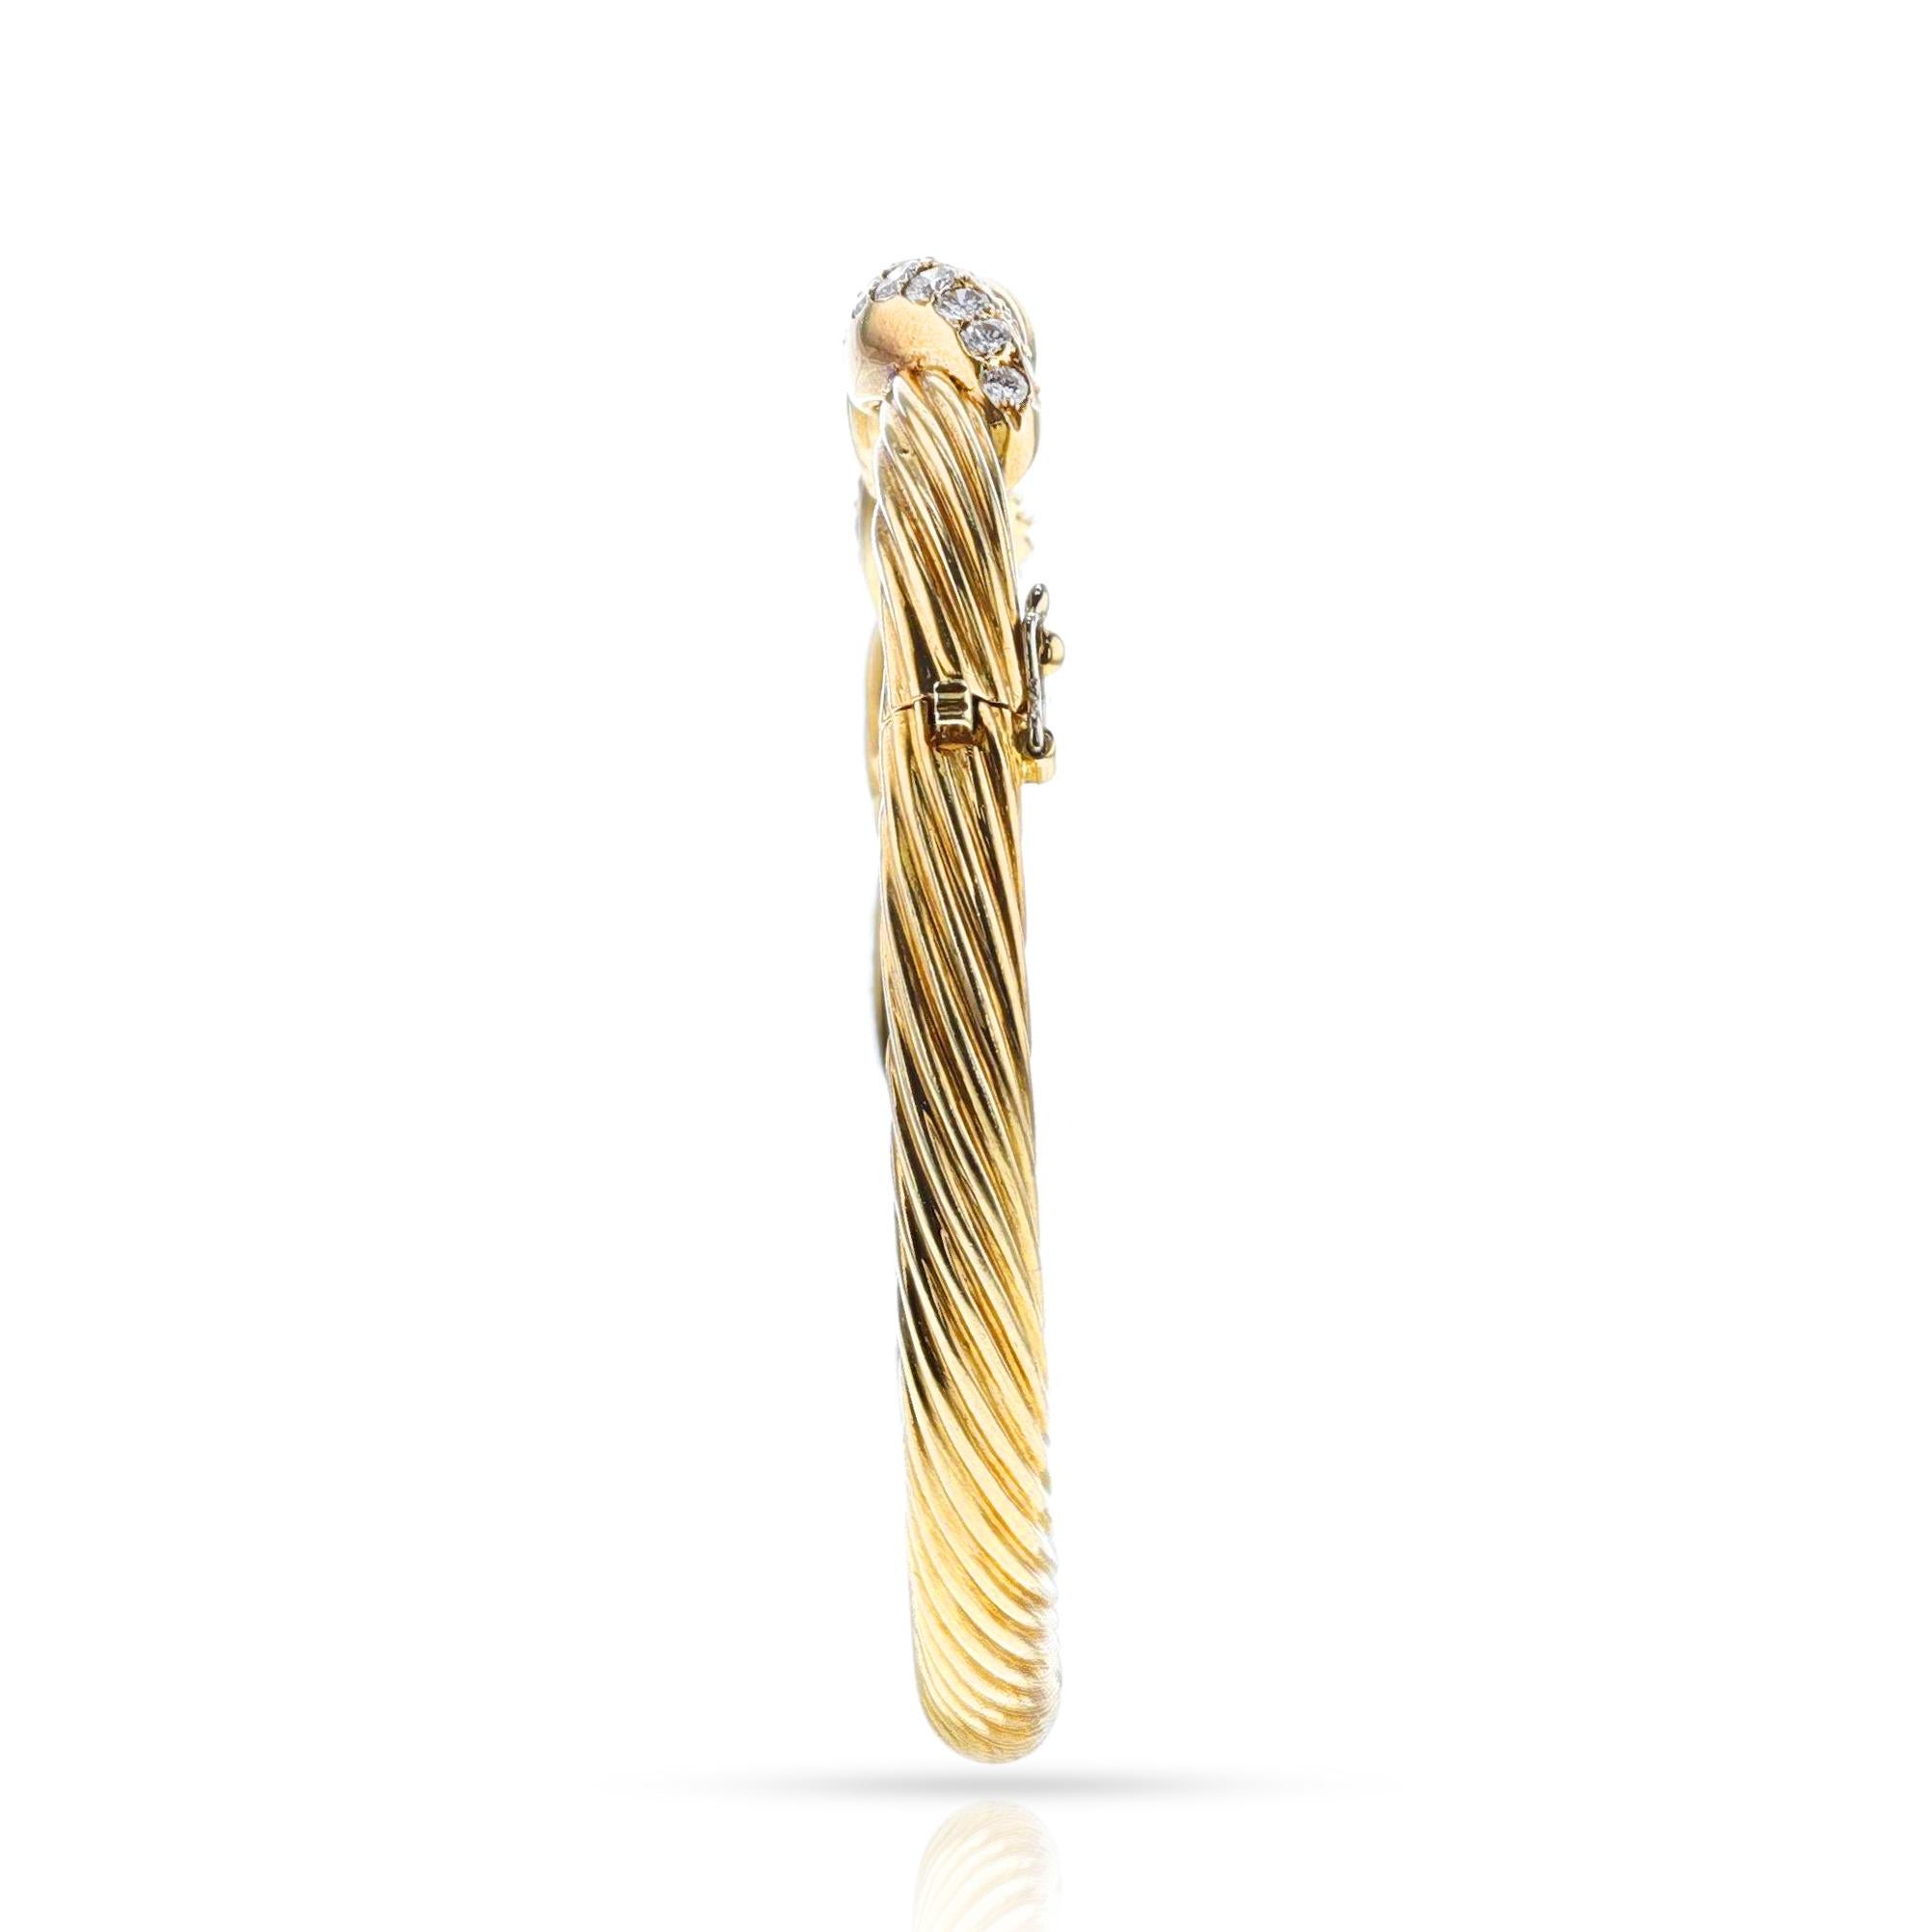 Van Cleef & Arpels Diamond and Gold Twisted Bangle, 18k For Sale 1